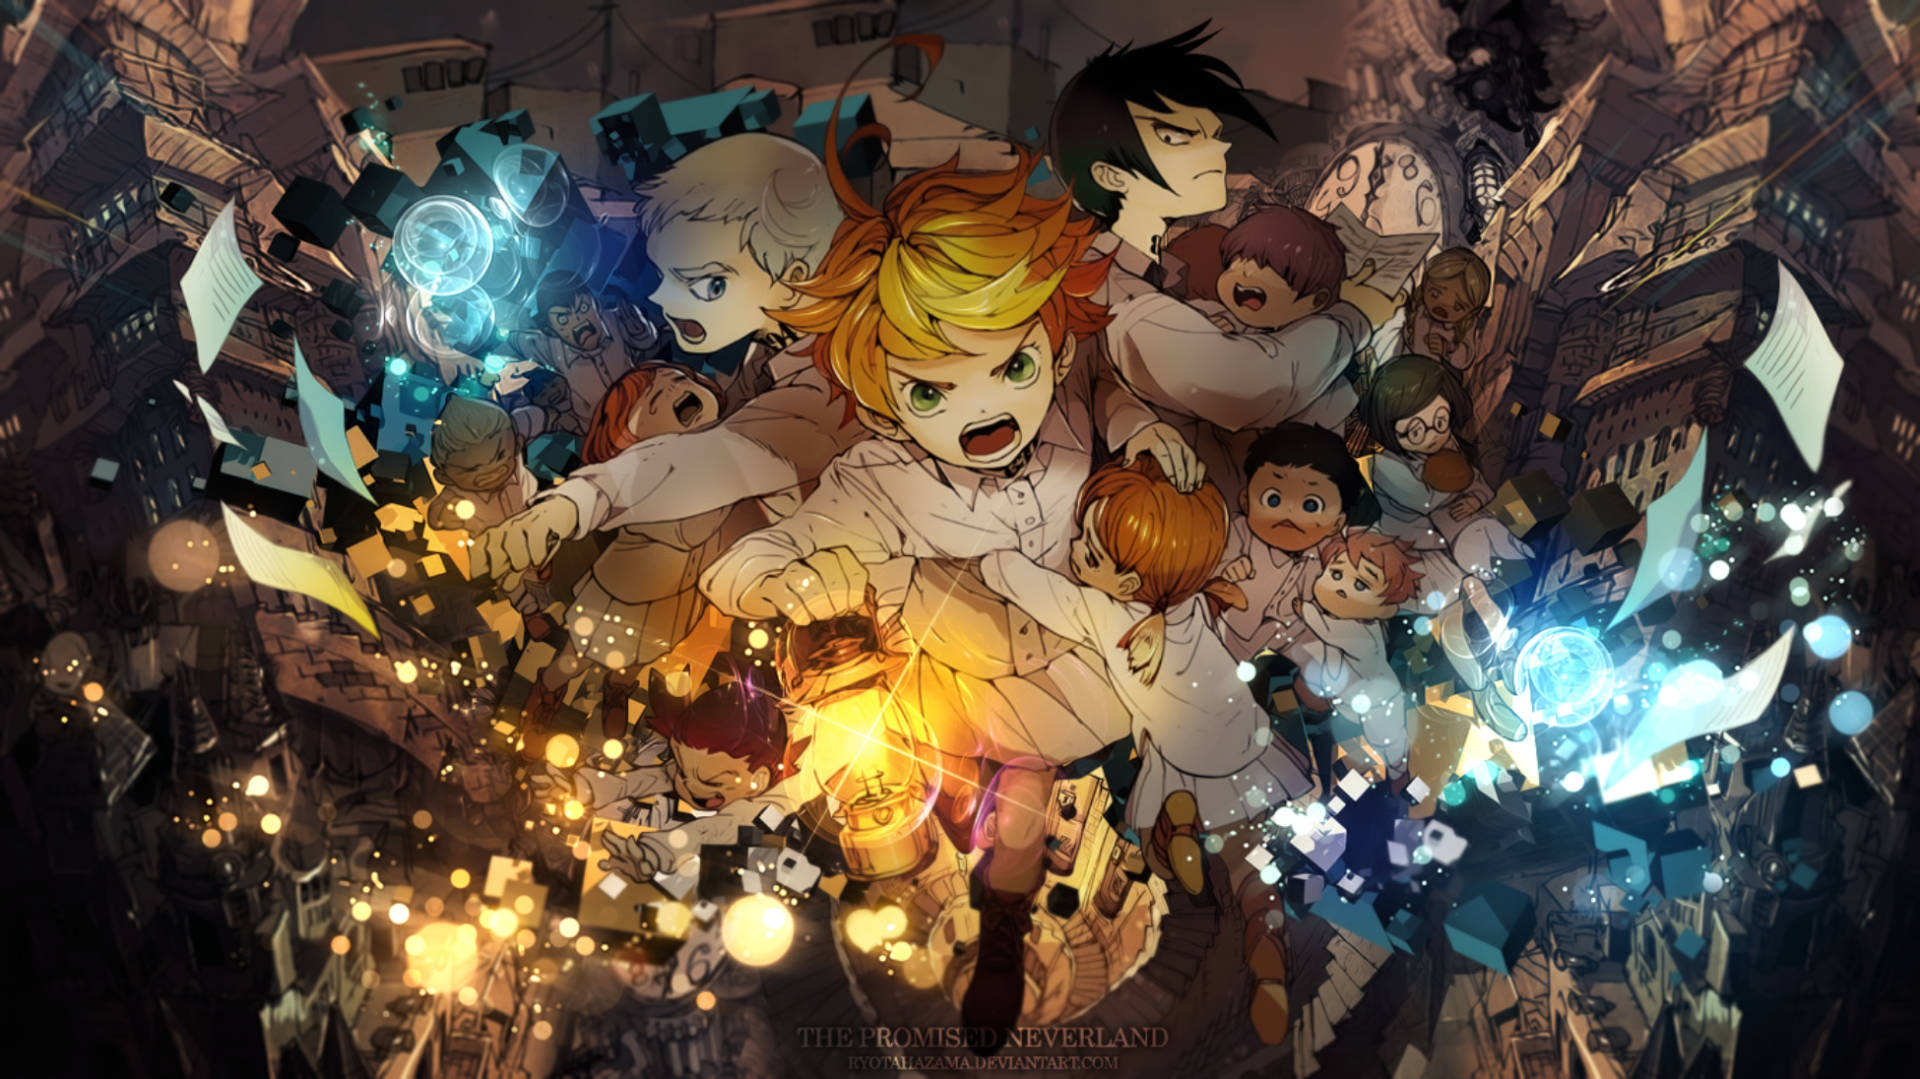 The Promised Neverland Book Cover Wallpaper